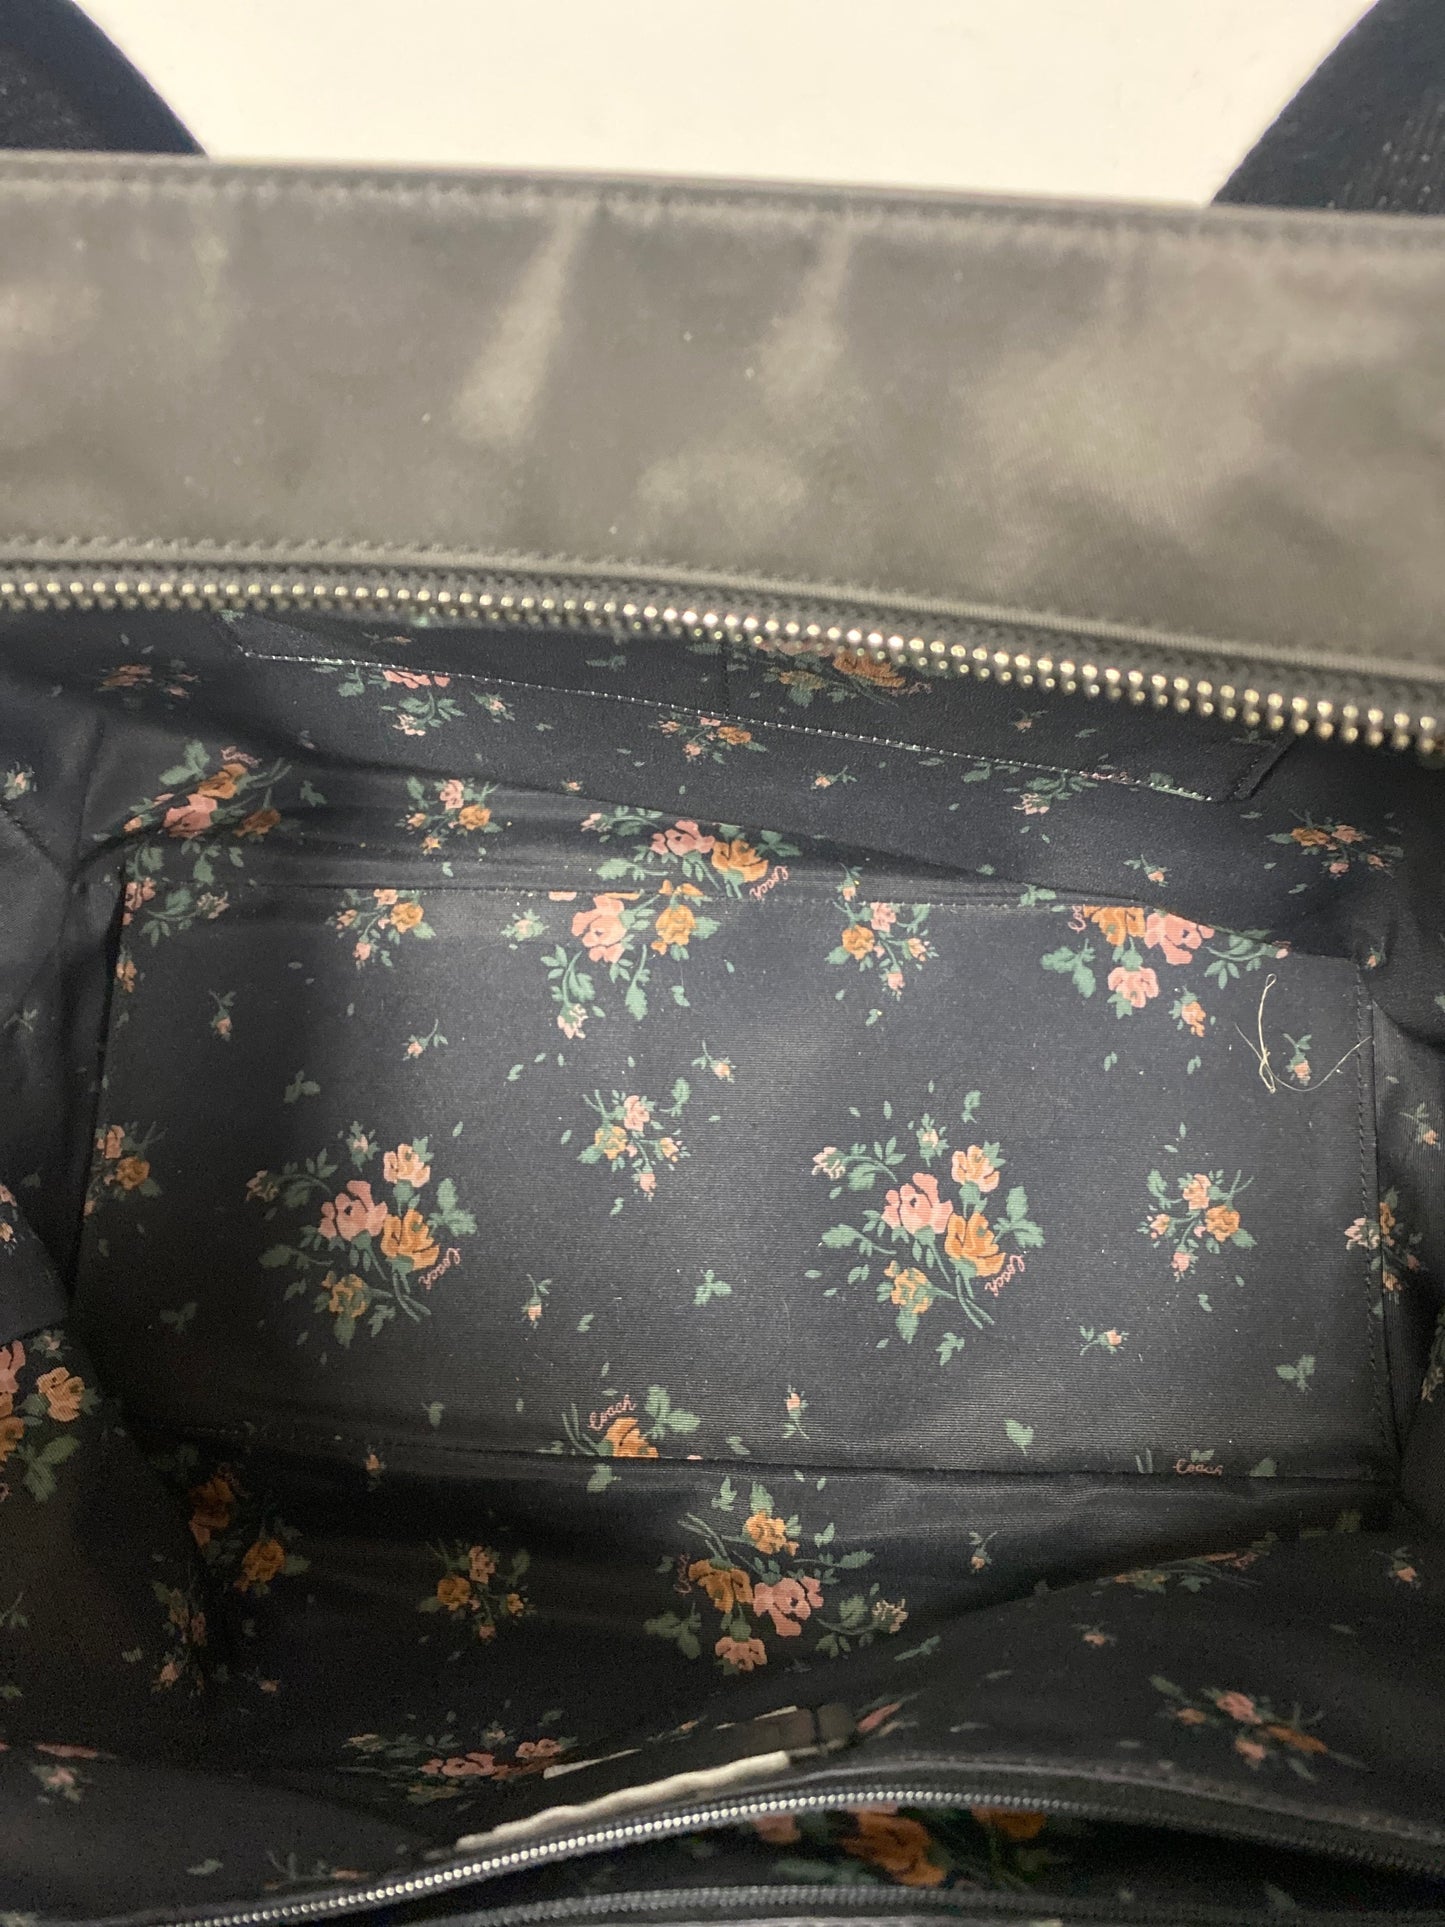 Duffle And Weekender Designer By Coach  Size: Medium